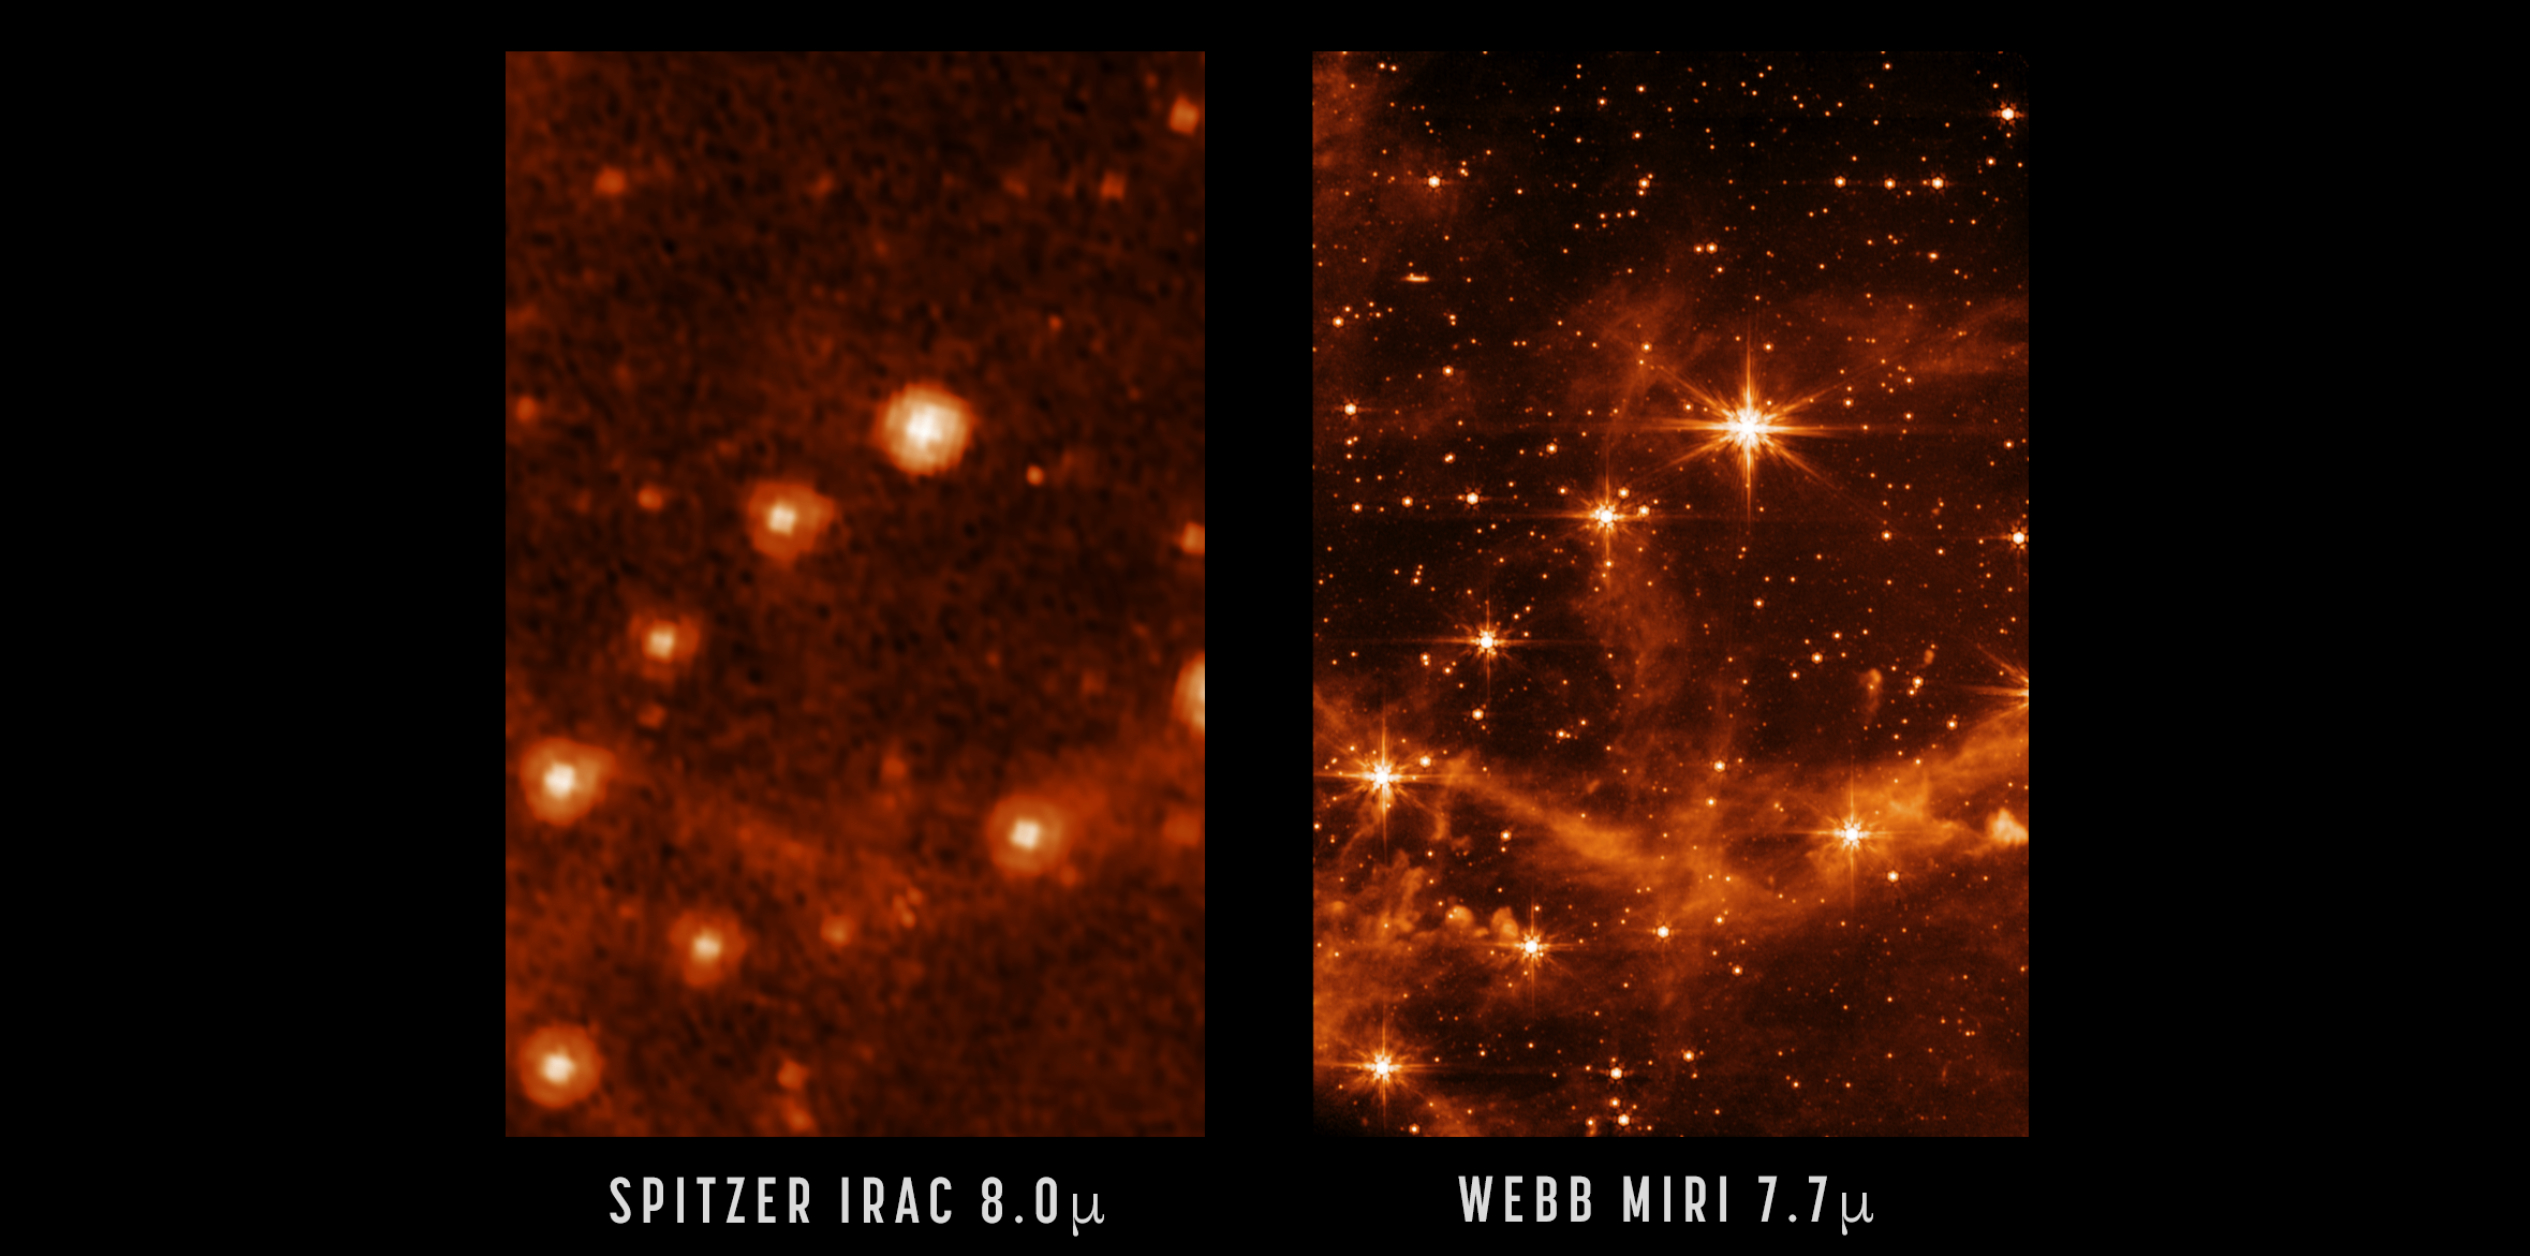 Left: a part of the Large Magellanic Cloud taken by the retired Spitzer Space Telescope; Right: the same patch of sky taken by the Webb's Mid-Infrared Instrument (MIRI). Apparently, Webb reveals more details in a higher resolution.                                          Image credit: Spitzer: NASA/JPL-Caltech; MIRI: NASA/ESA/CSA/STScI